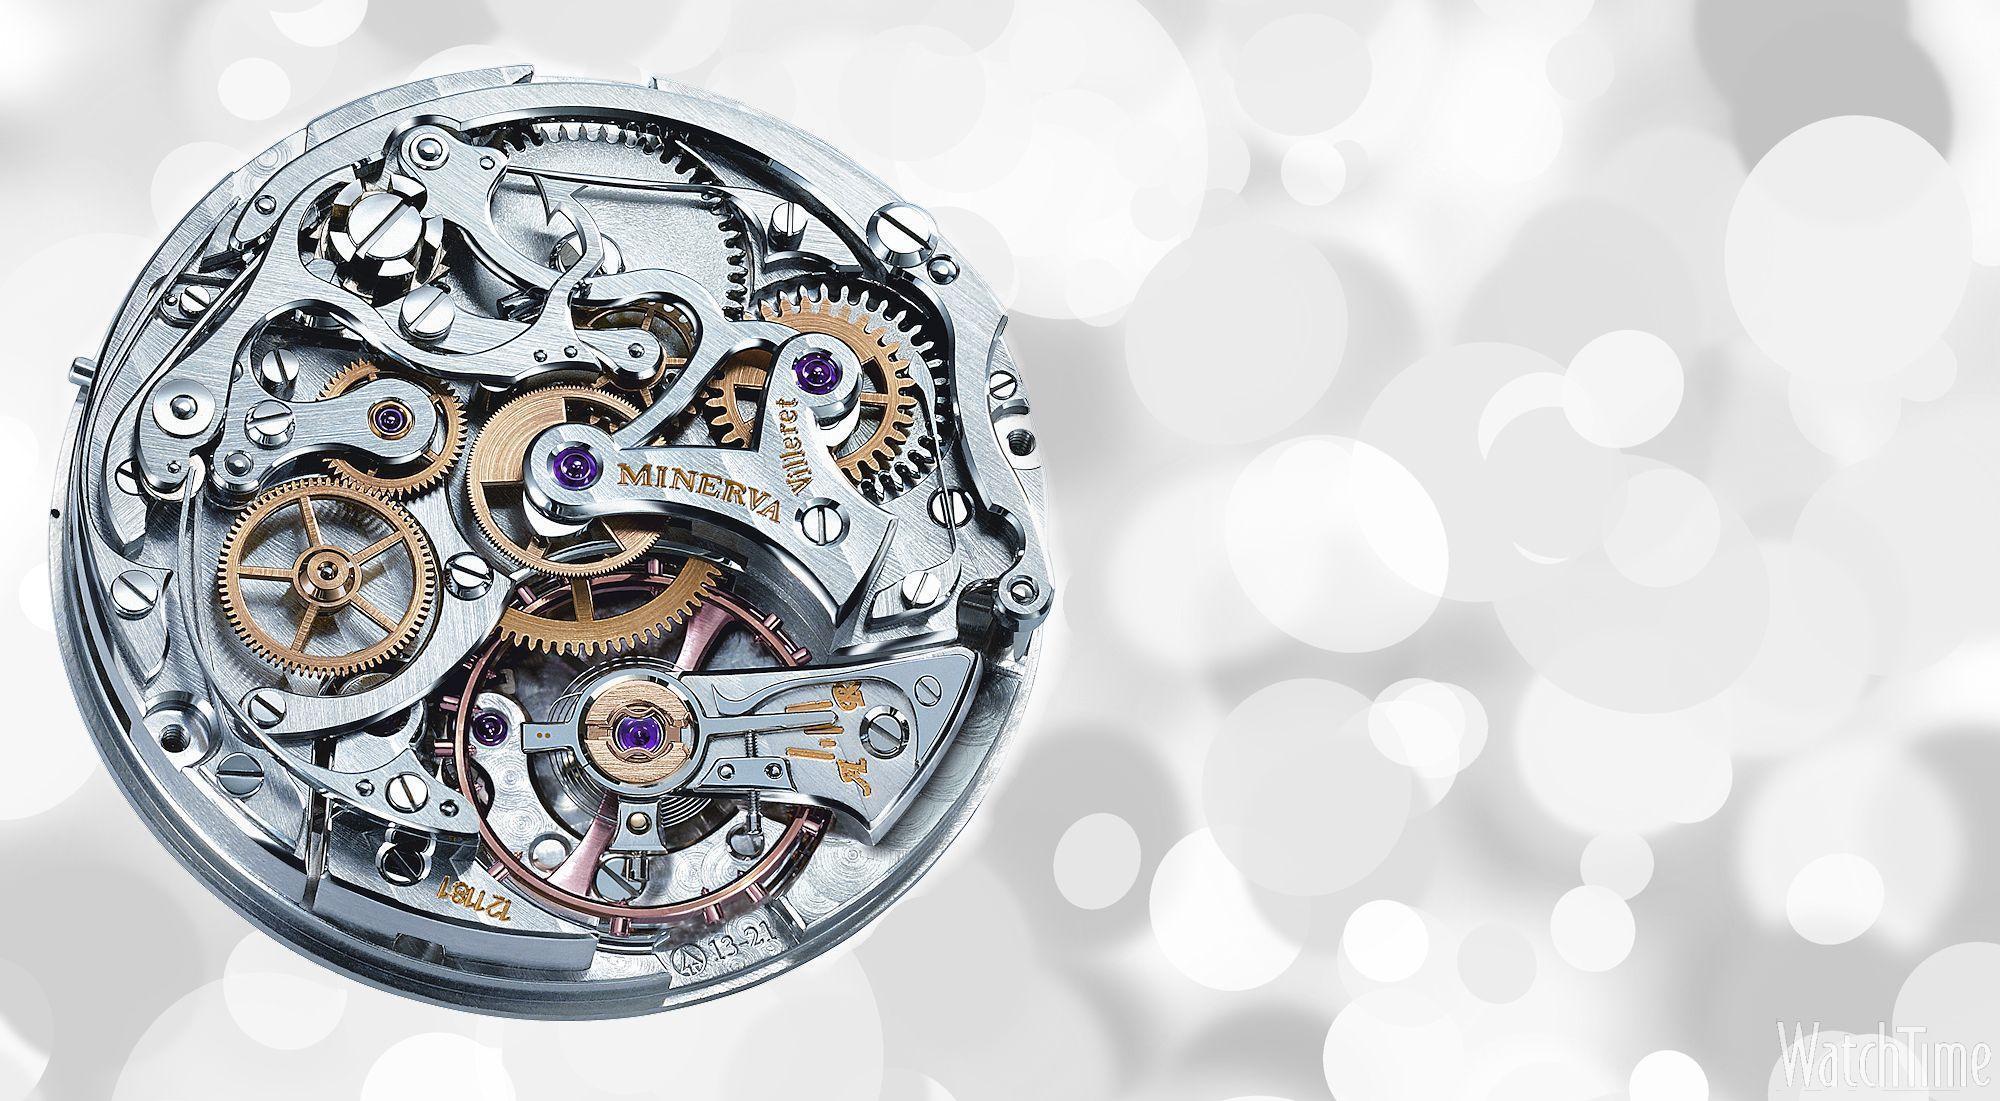 Watch Wallpaper: 8 Montblanc Watches and Movements › WatchTime